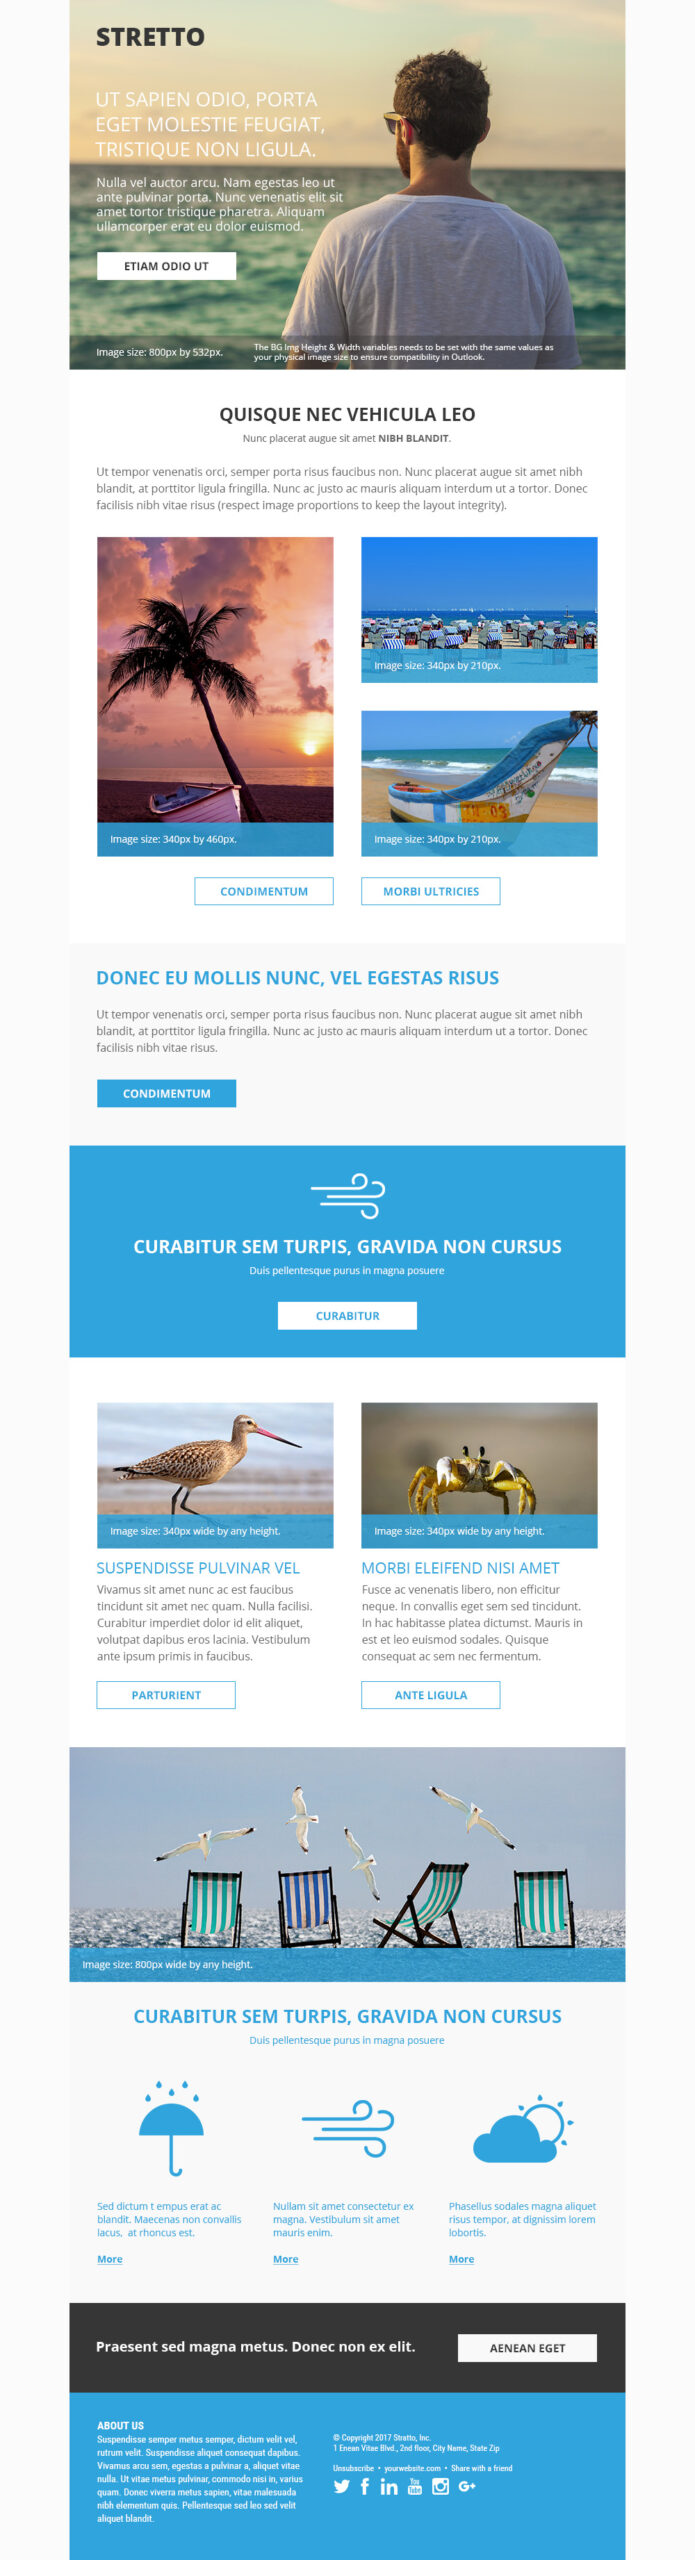 Responsive Marketo Email And Landing Page Templates | Perkuto With Marketo Email Templates